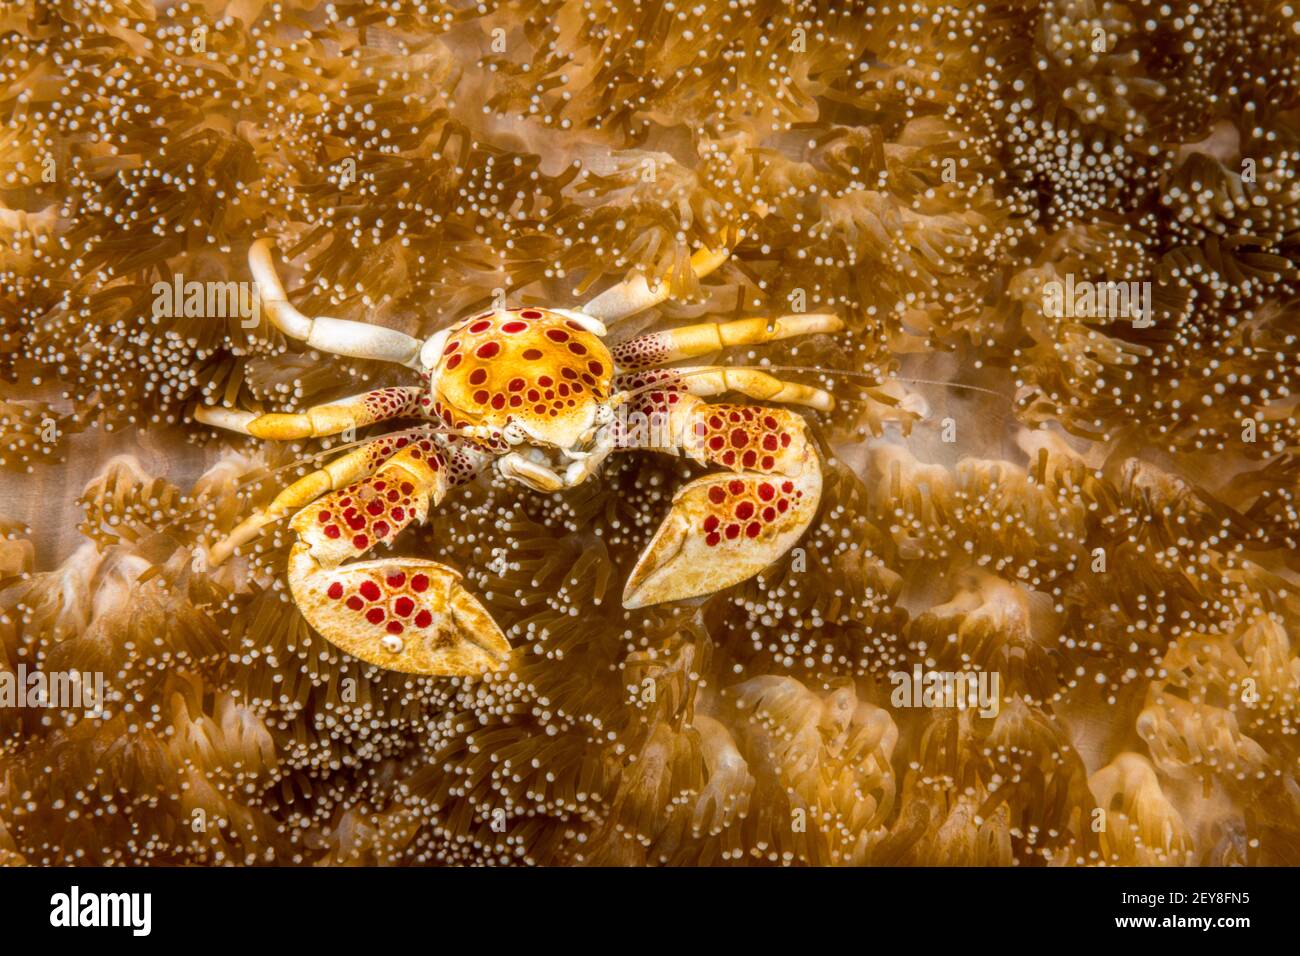 The porcelain crab, Neopetrolisthes maculatus, is commensal in sea anemones, Philippines. Stock Photo